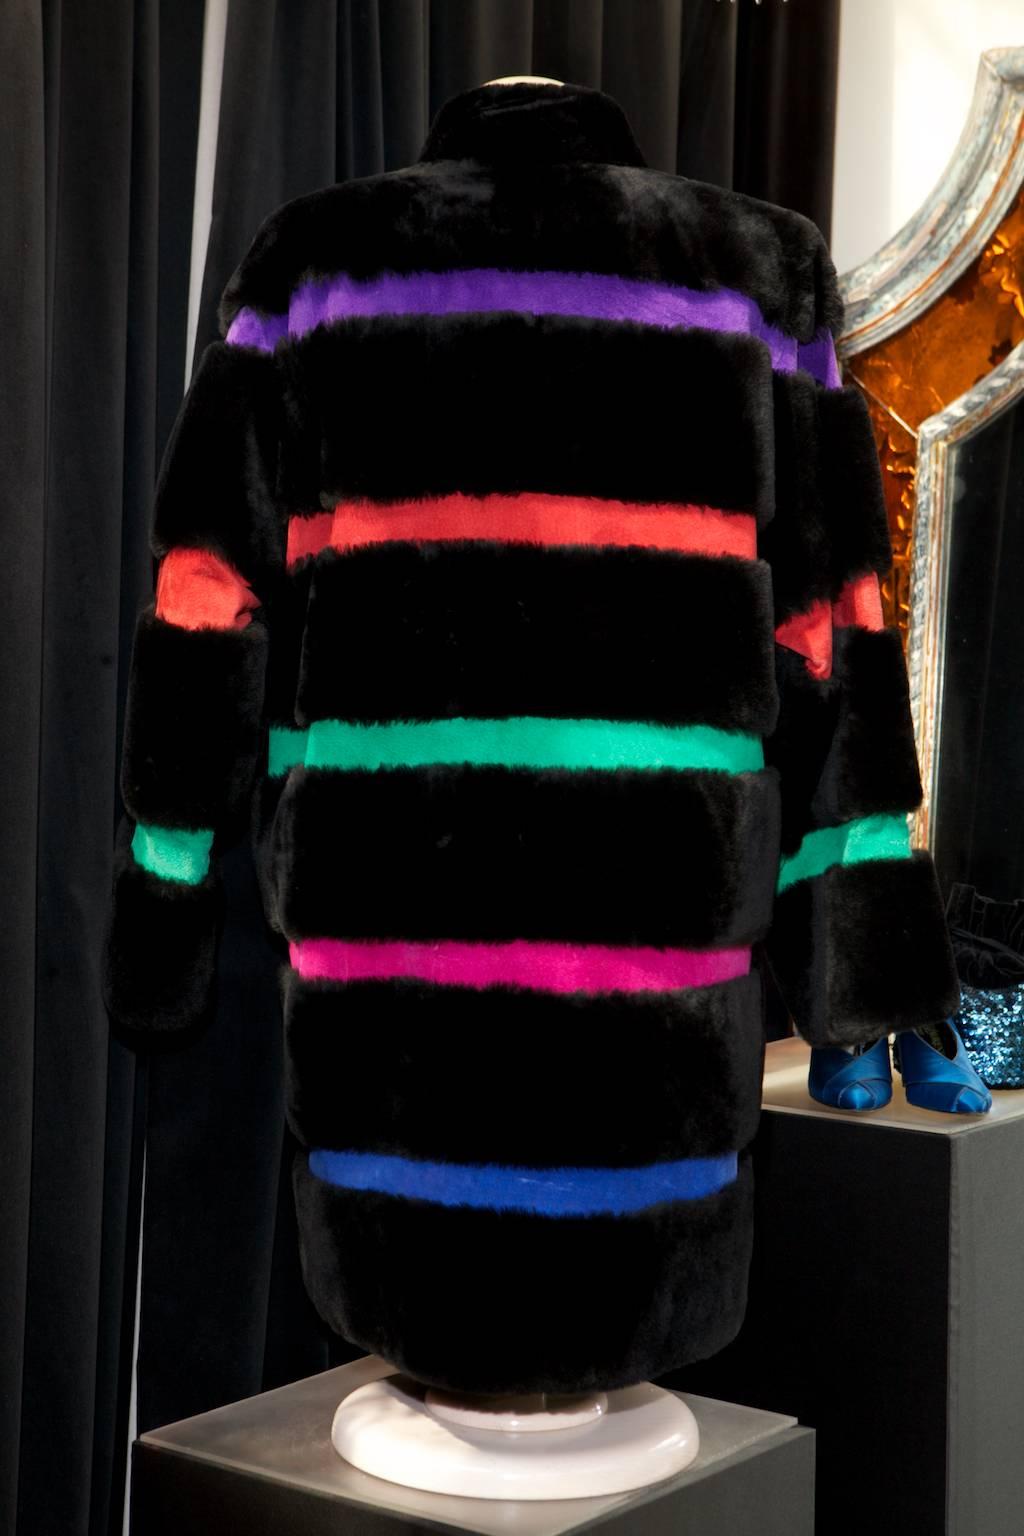 YVES SAINT LAURENT FOURRURE mid length coat with long sleeves made of black dyed sheep fur alternating thin strips of suede in purple, red, green, pink and blue colors

The coat fastens in the front with a button-five black resin buttonhole